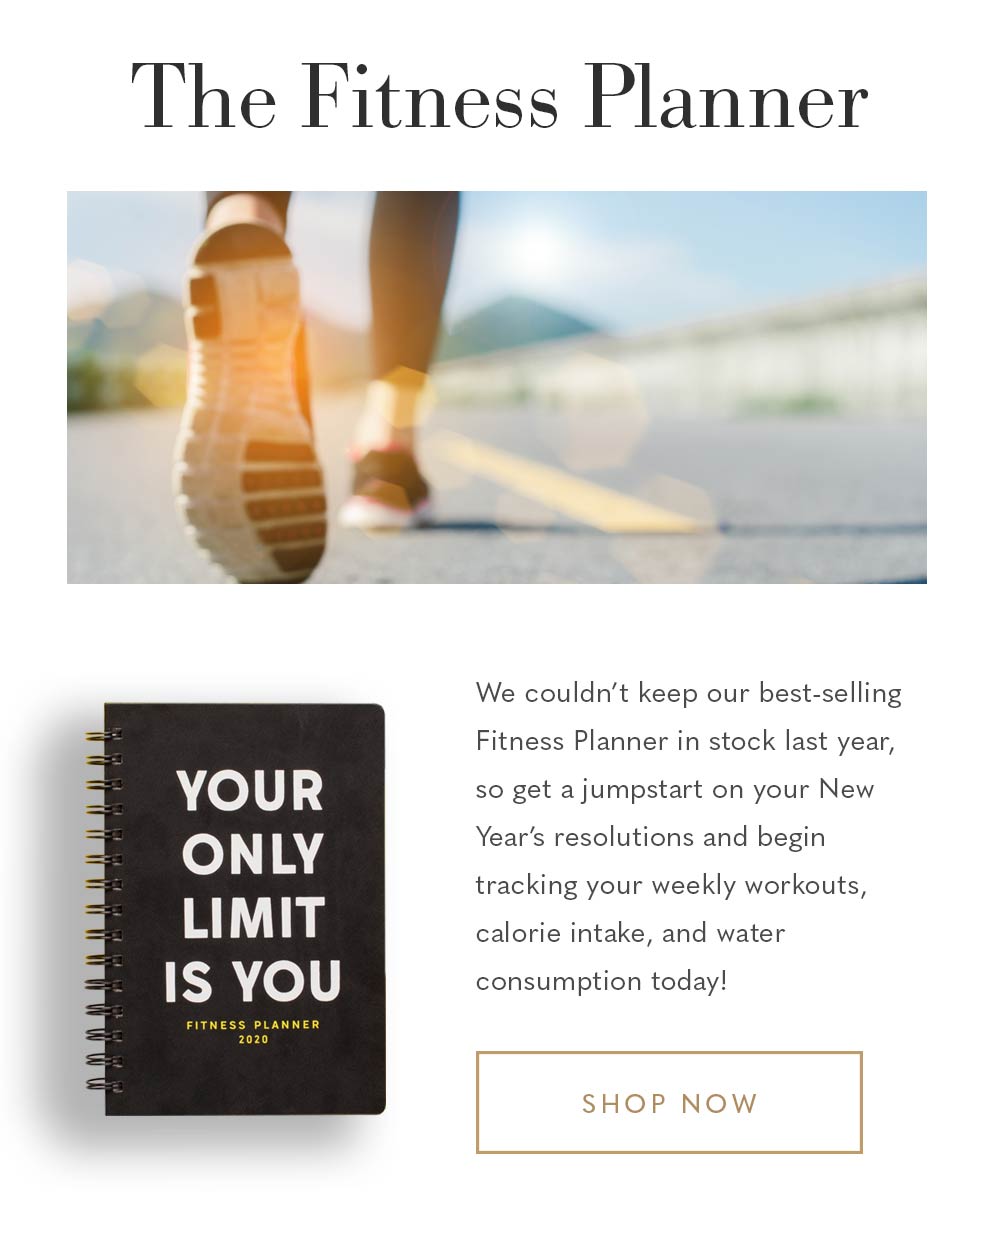 The Fitness Planner